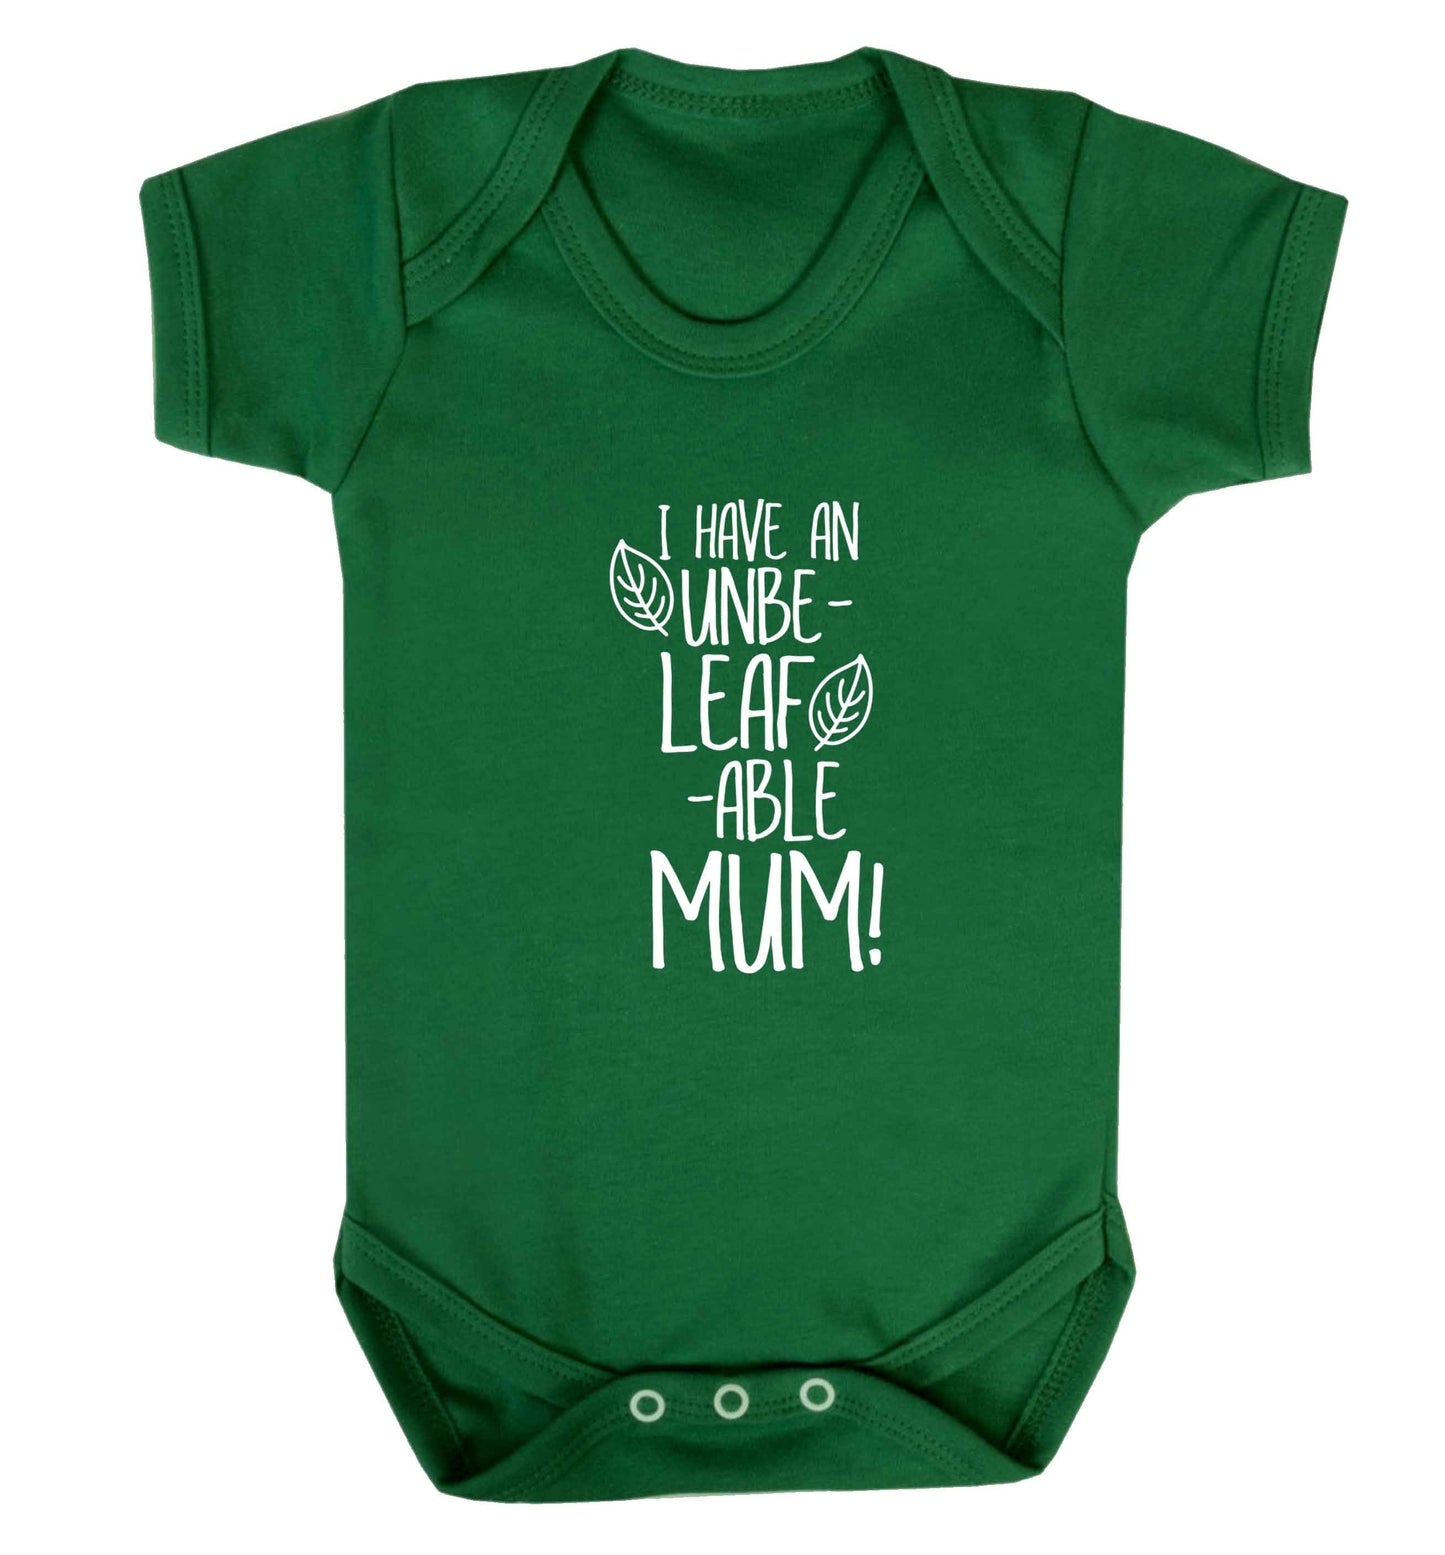 I have an unbeleafable mum! baby vest green 18-24 months